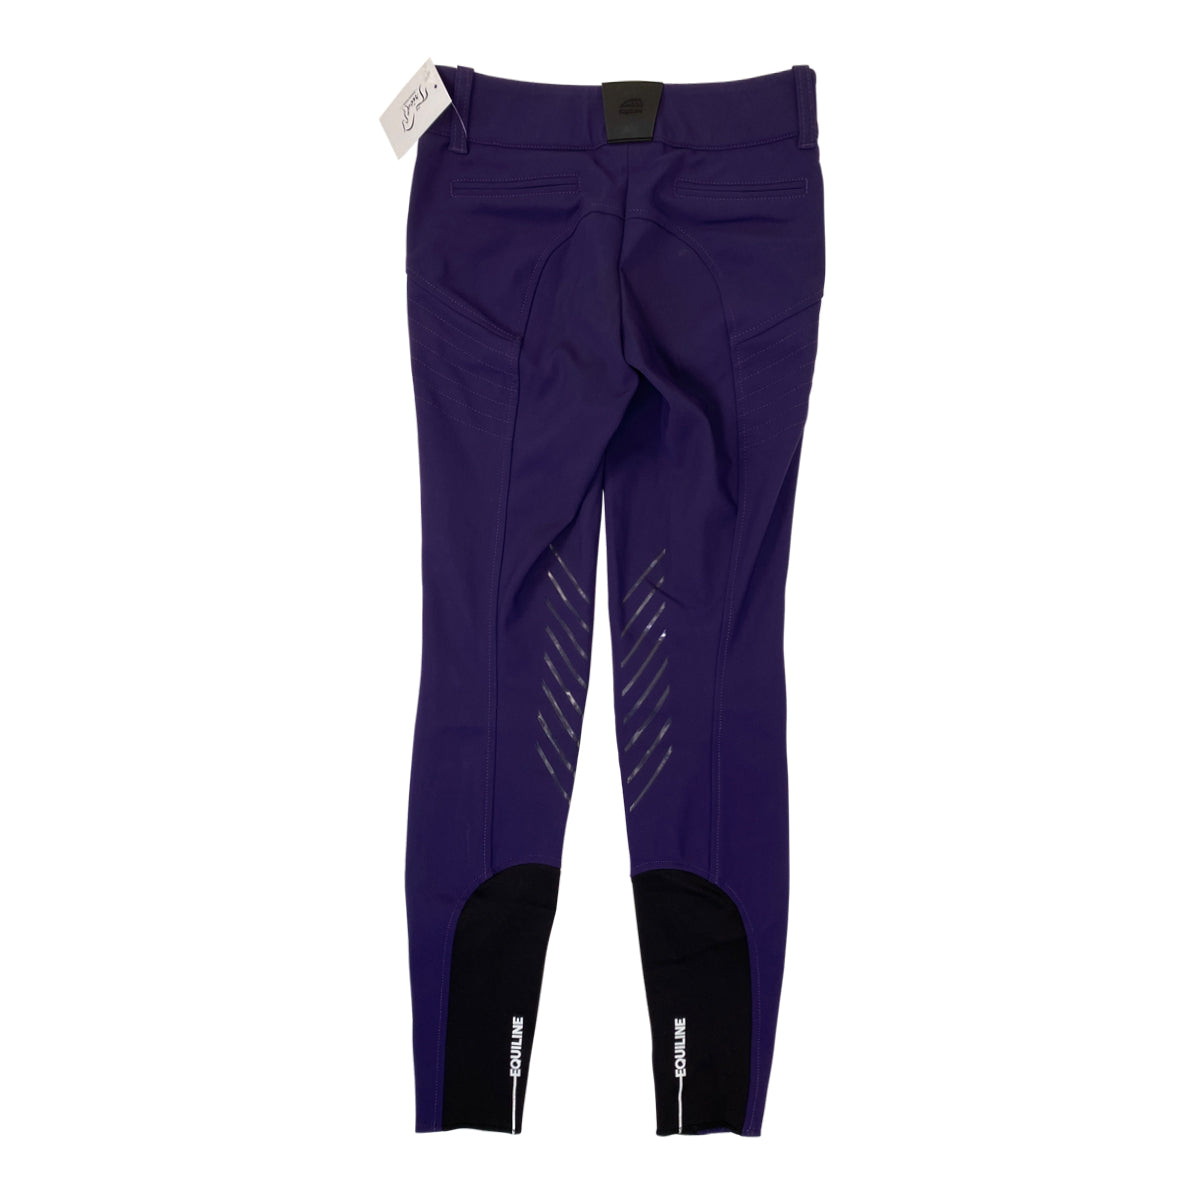 Equiline X ShapeK B-Move Knee Grip Breeches in Violet